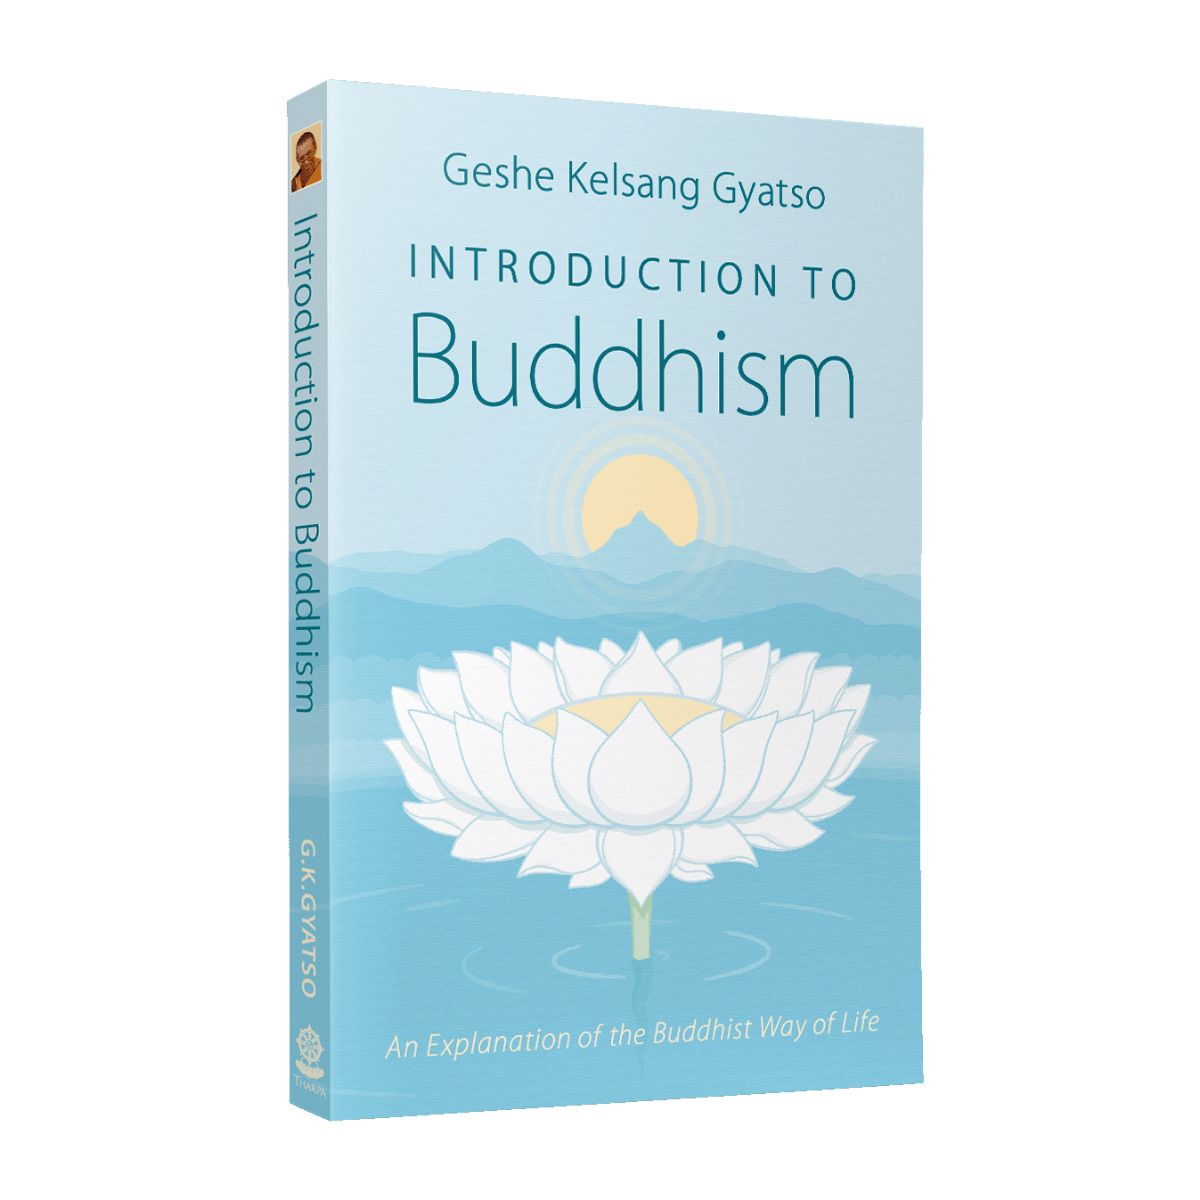 Introduction to Buddhism book with new cover